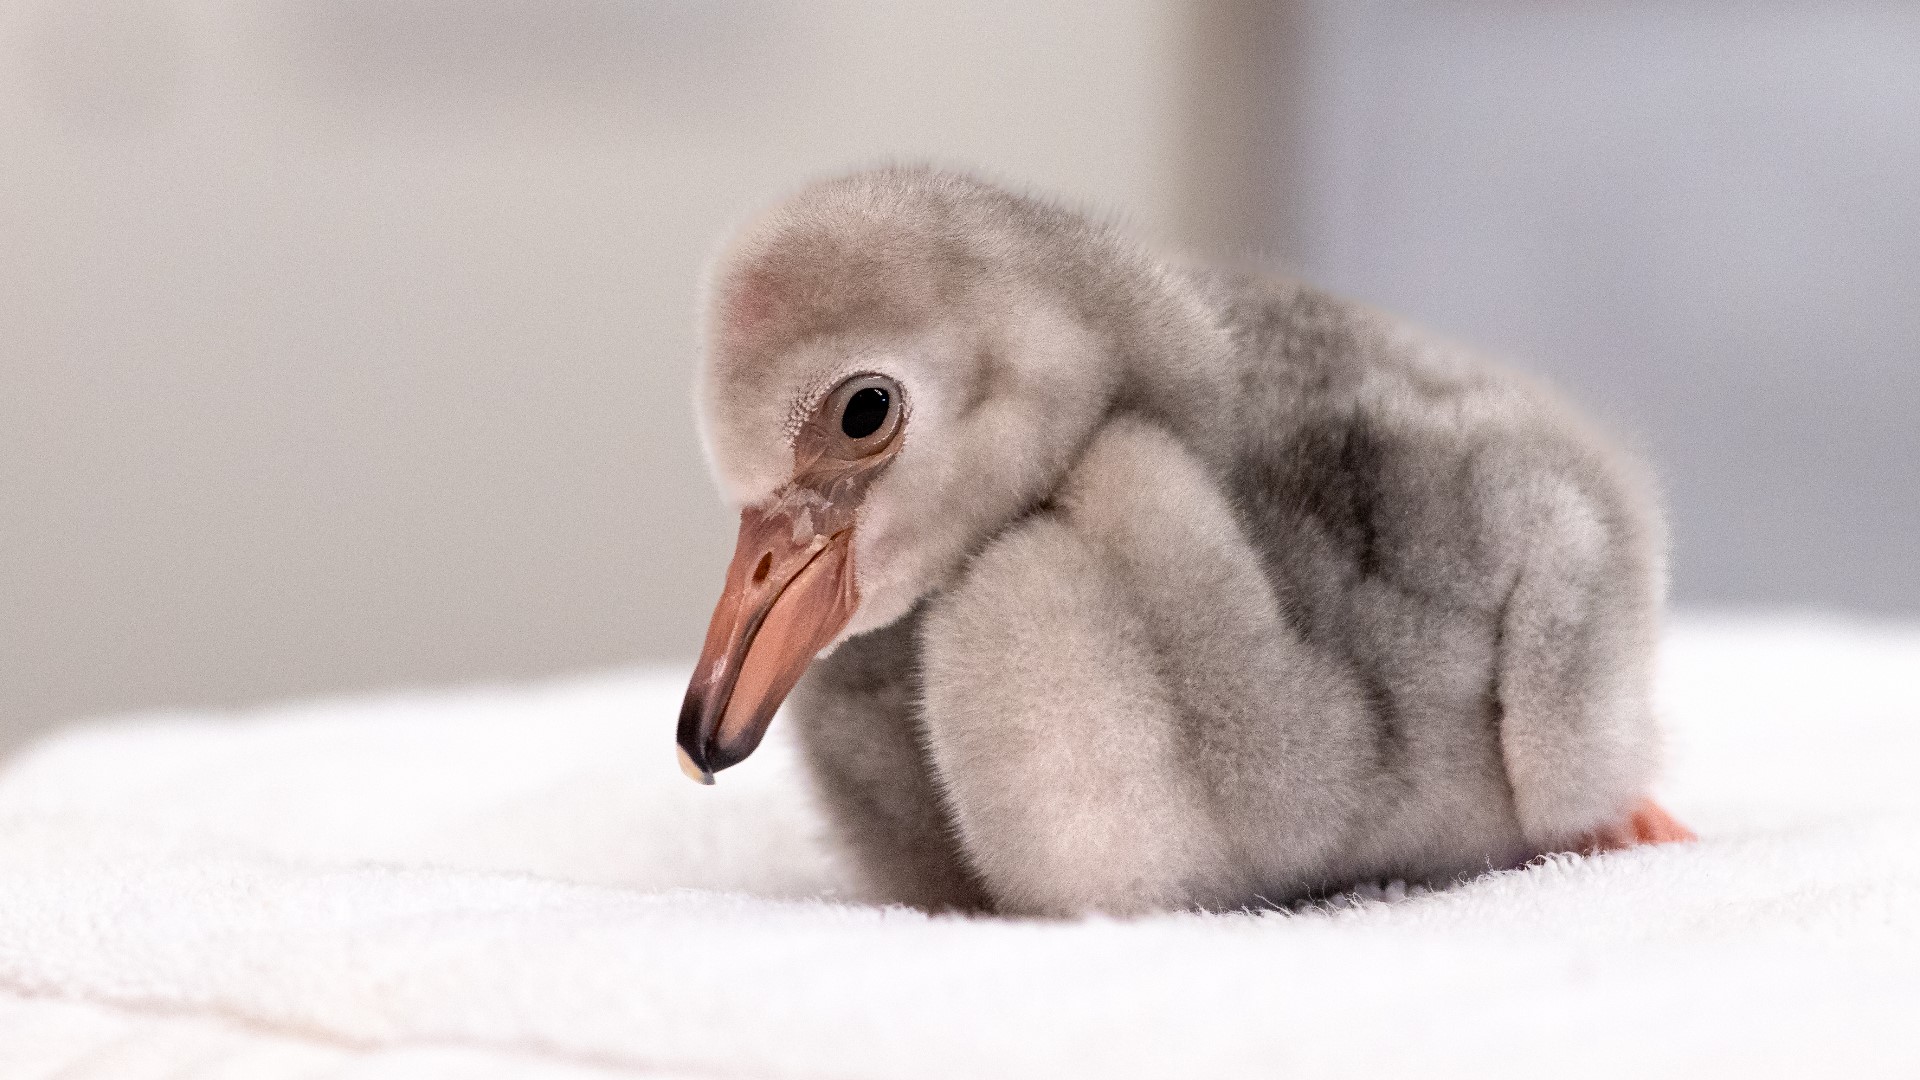 The zoo says 17 flamingos have been hatched over the last month.